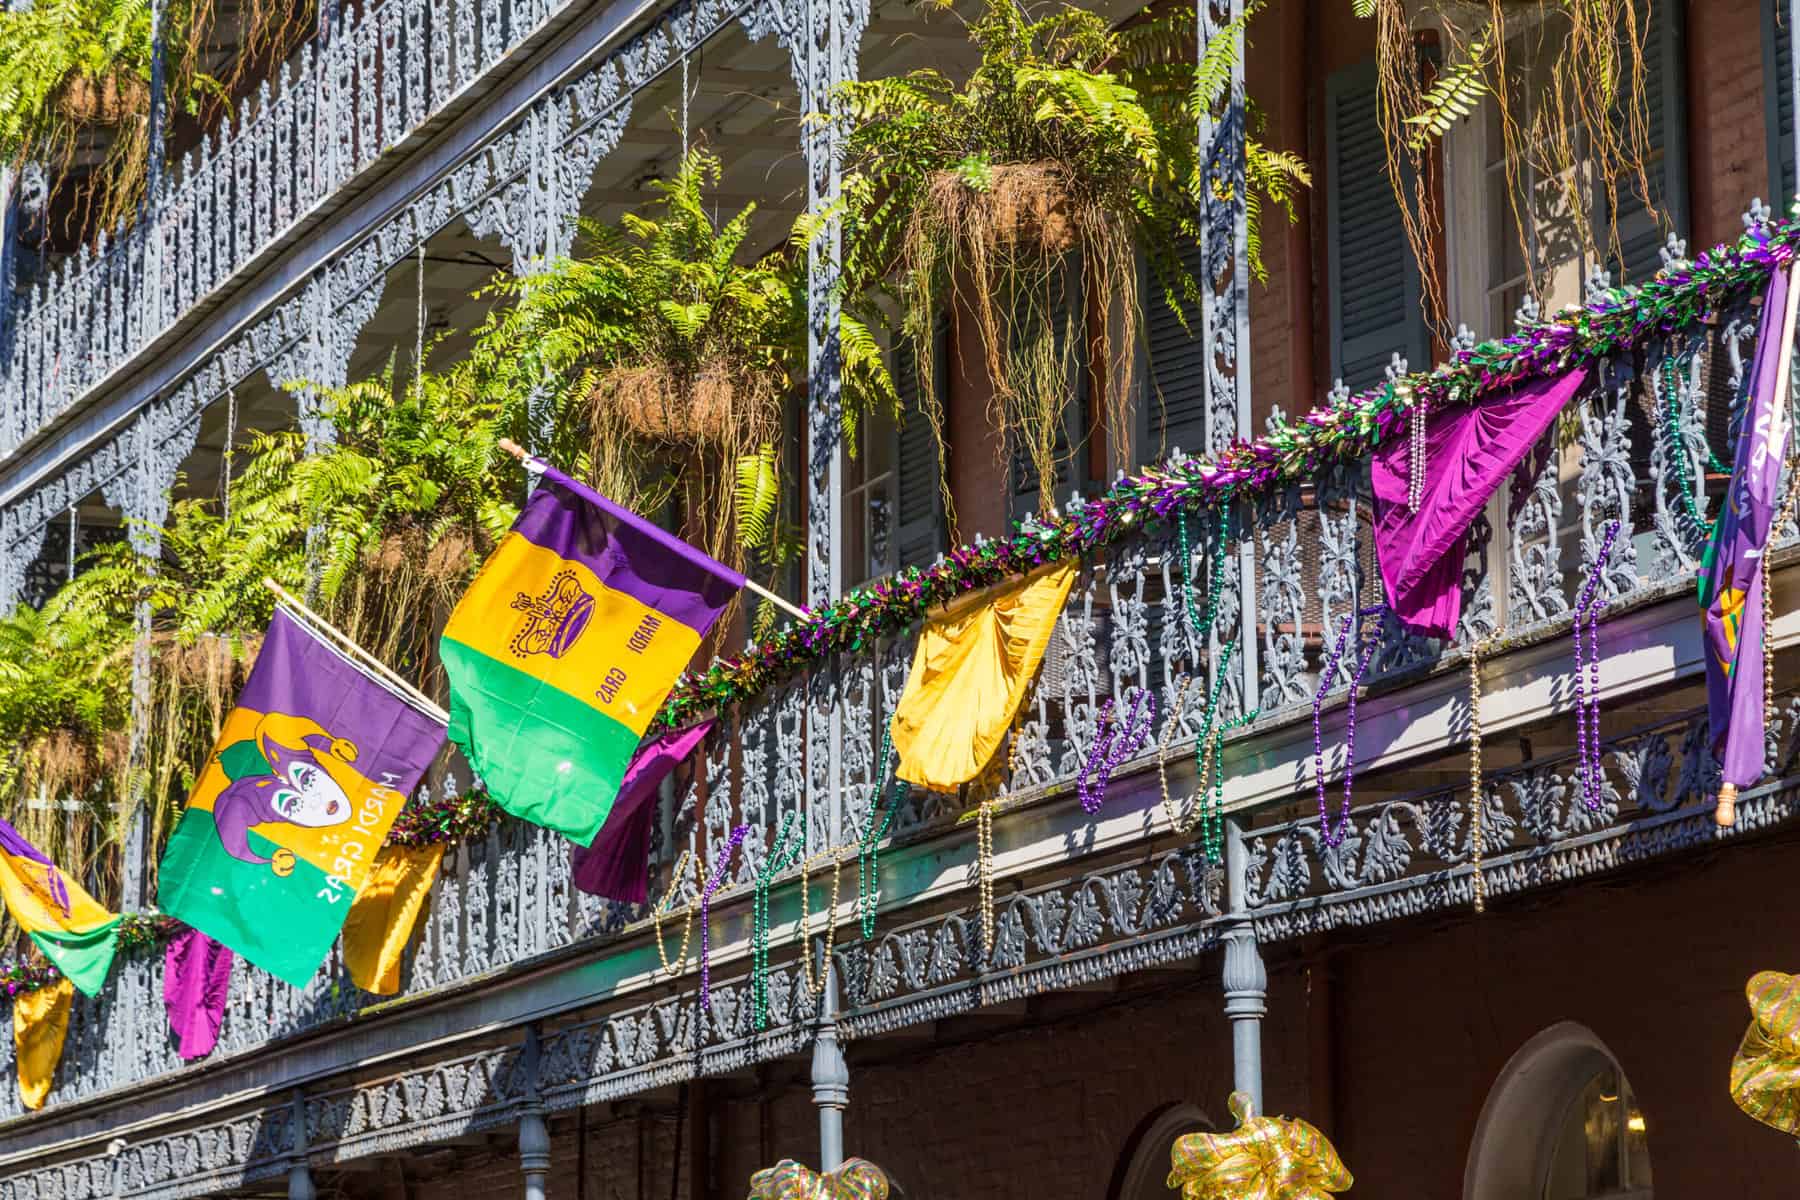 Ironwork fences in the French Quarter of Louisiana decorated for Mardi Gras